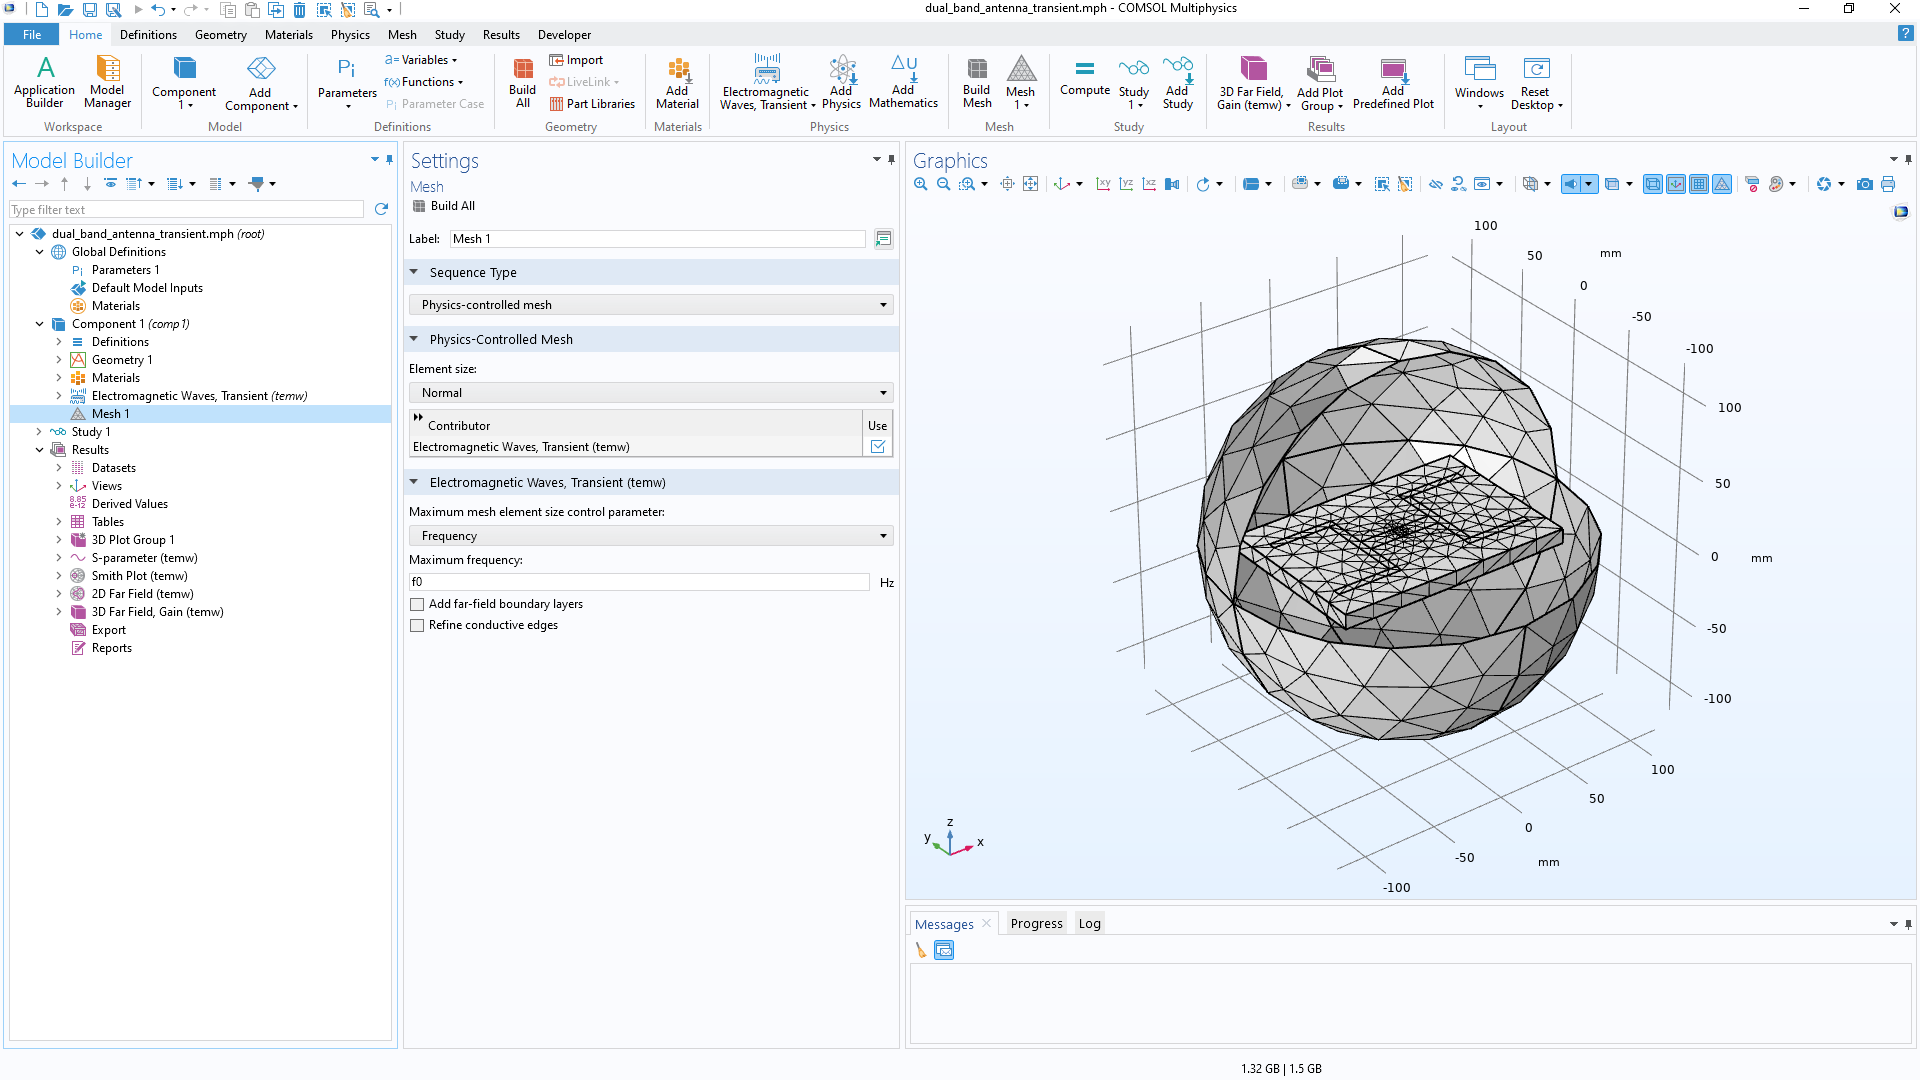 The COMSOL Multiphysics UI showing the Model Builder with the Mesh node highlighted, the corresponding Settings window with the frequency mesh element size option selected, and a dual-band antenna model in the Graphics window.